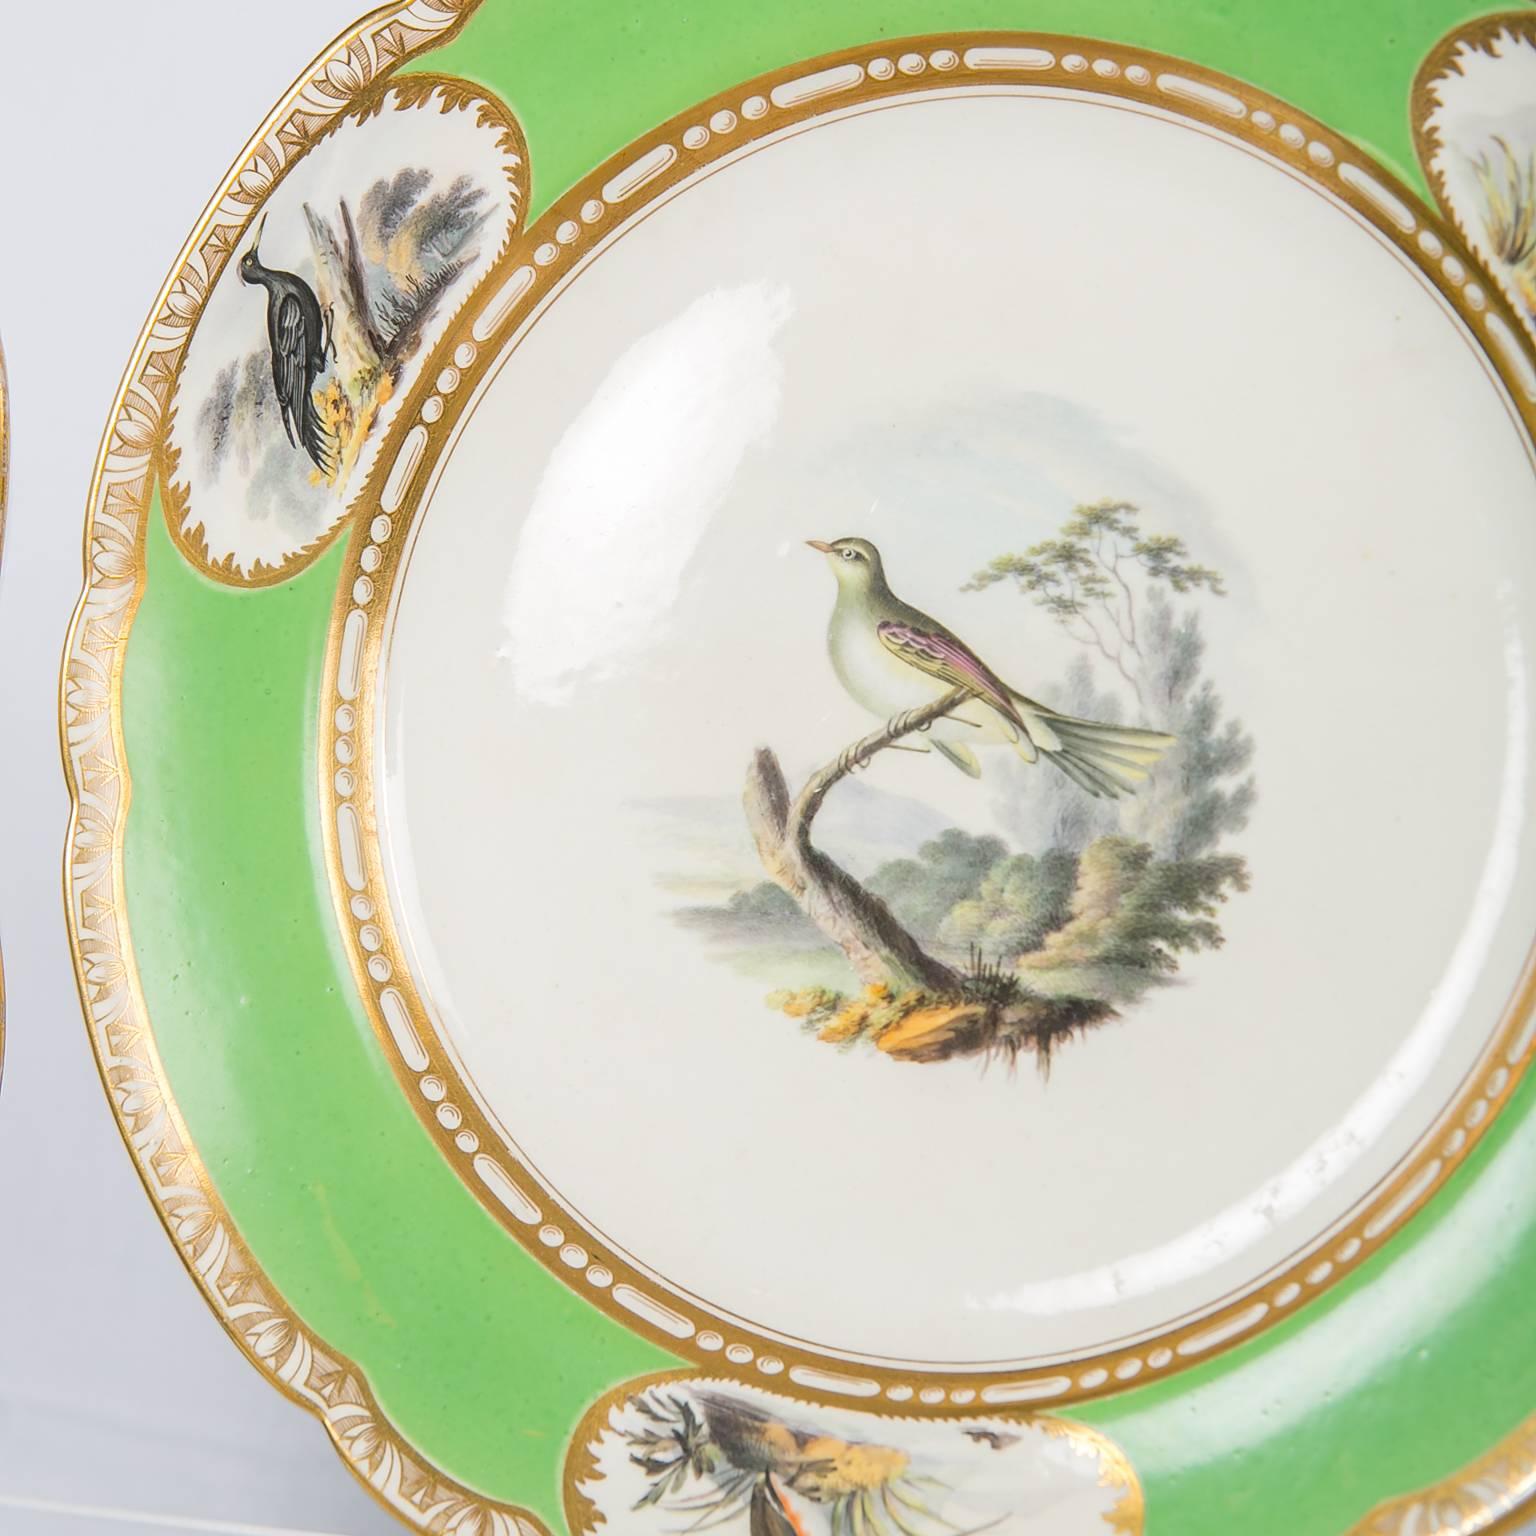 Porcelain Spode Dishes with Hand-Painted Birds and Apple Green Borders